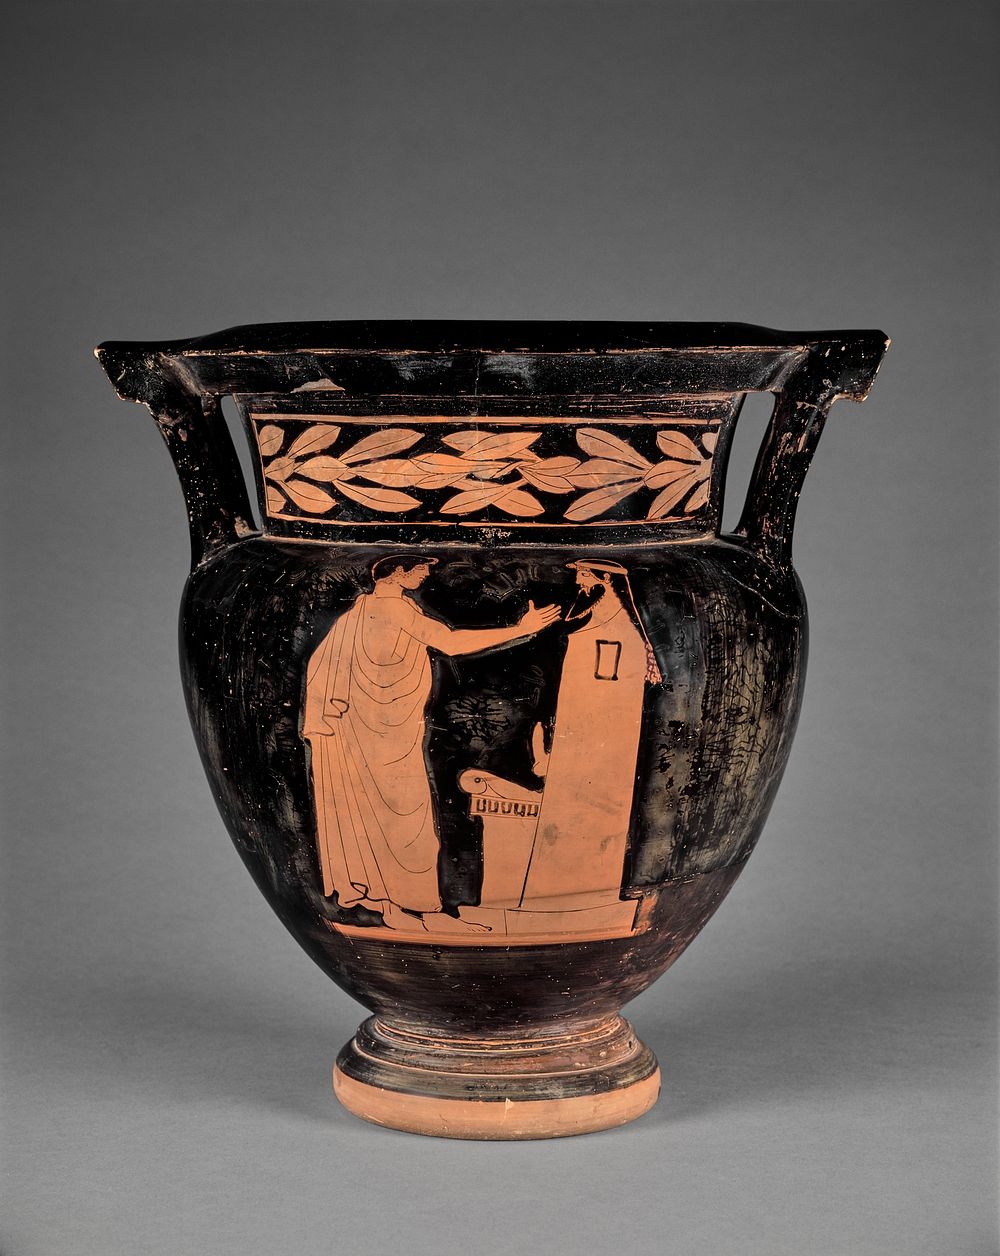 Attic Red-Figure Column Krater by Harrow Painter